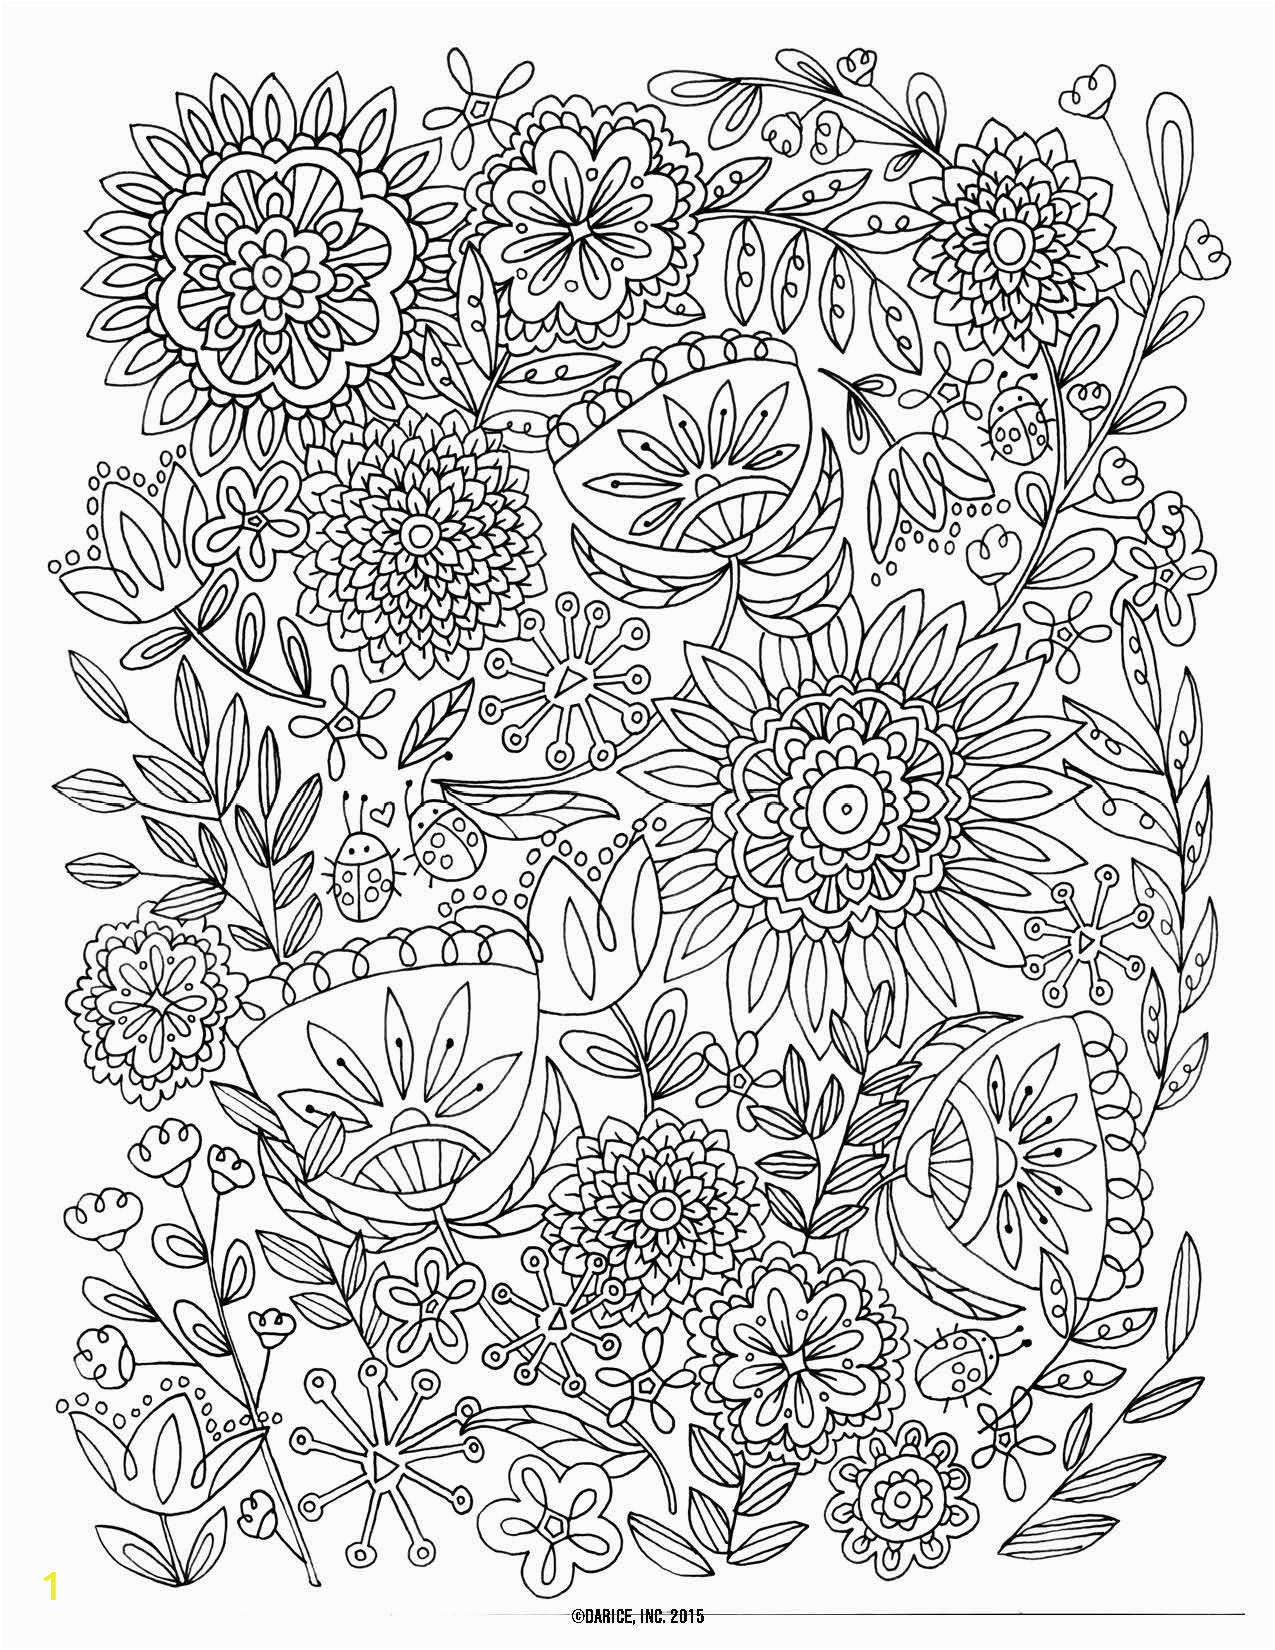 Free Coloring Pages for Adults 9 Free Printable Adult Coloring Pages